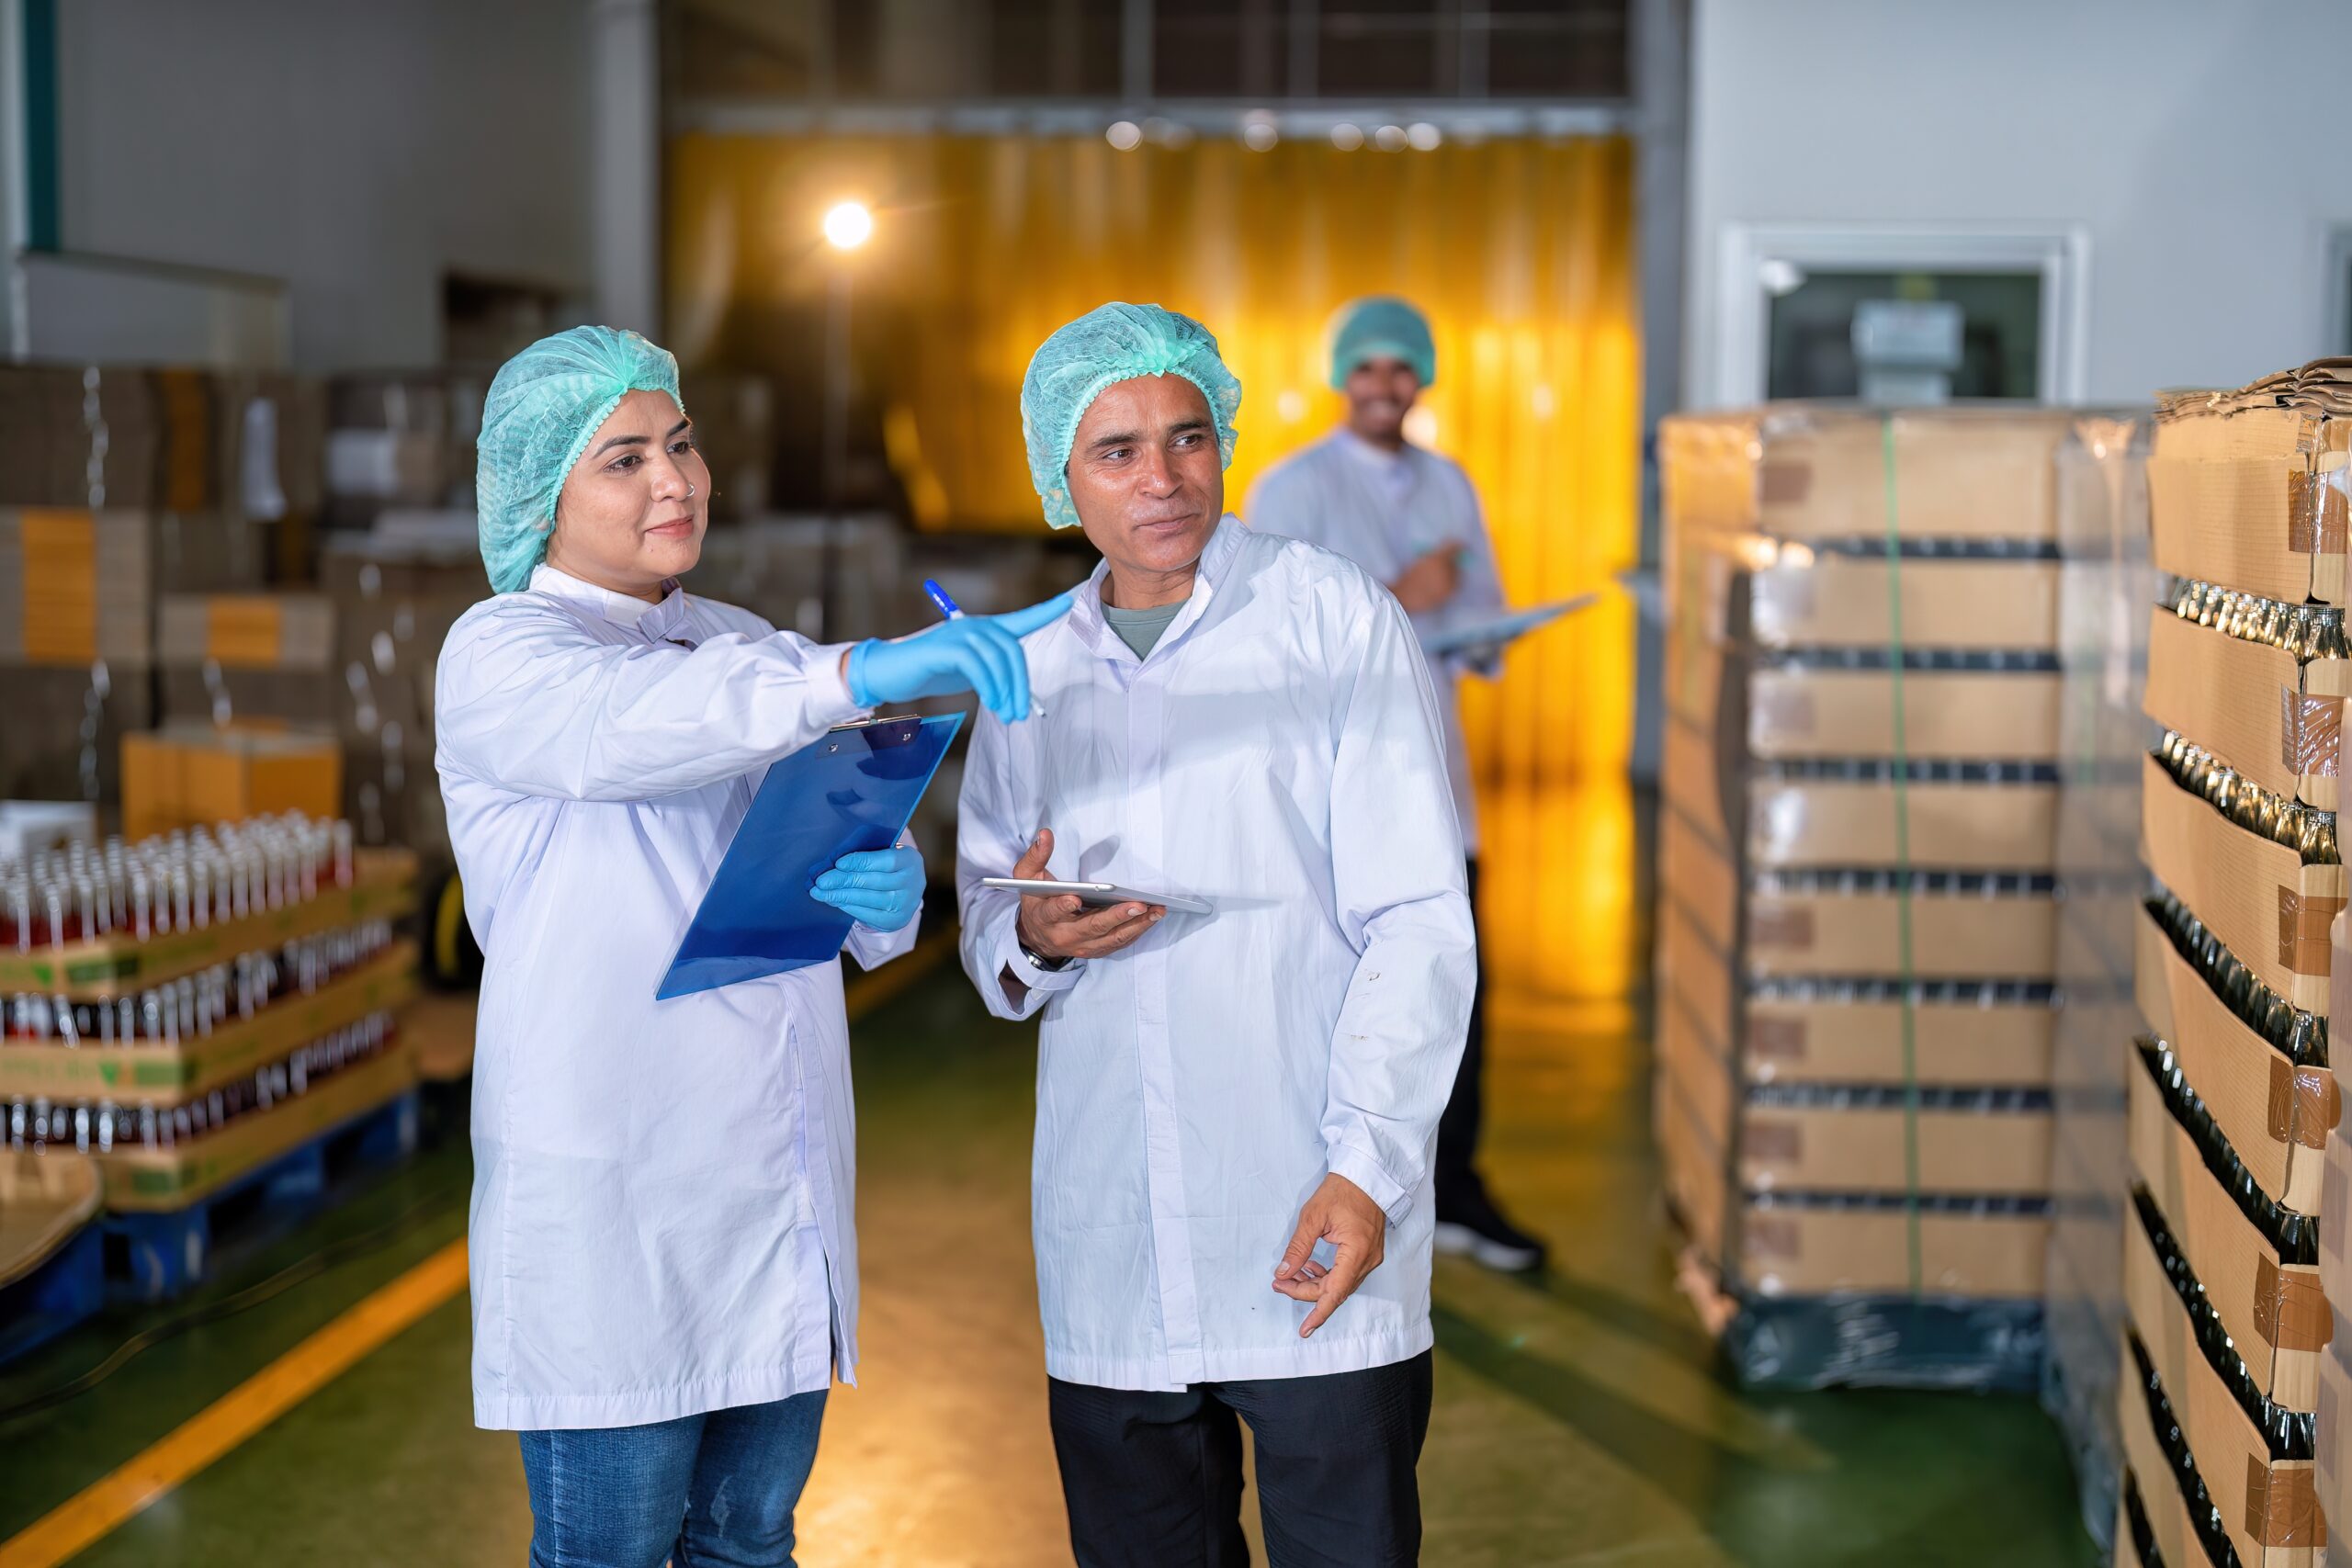 Two workers checking pharmaceutical products in a warehouse